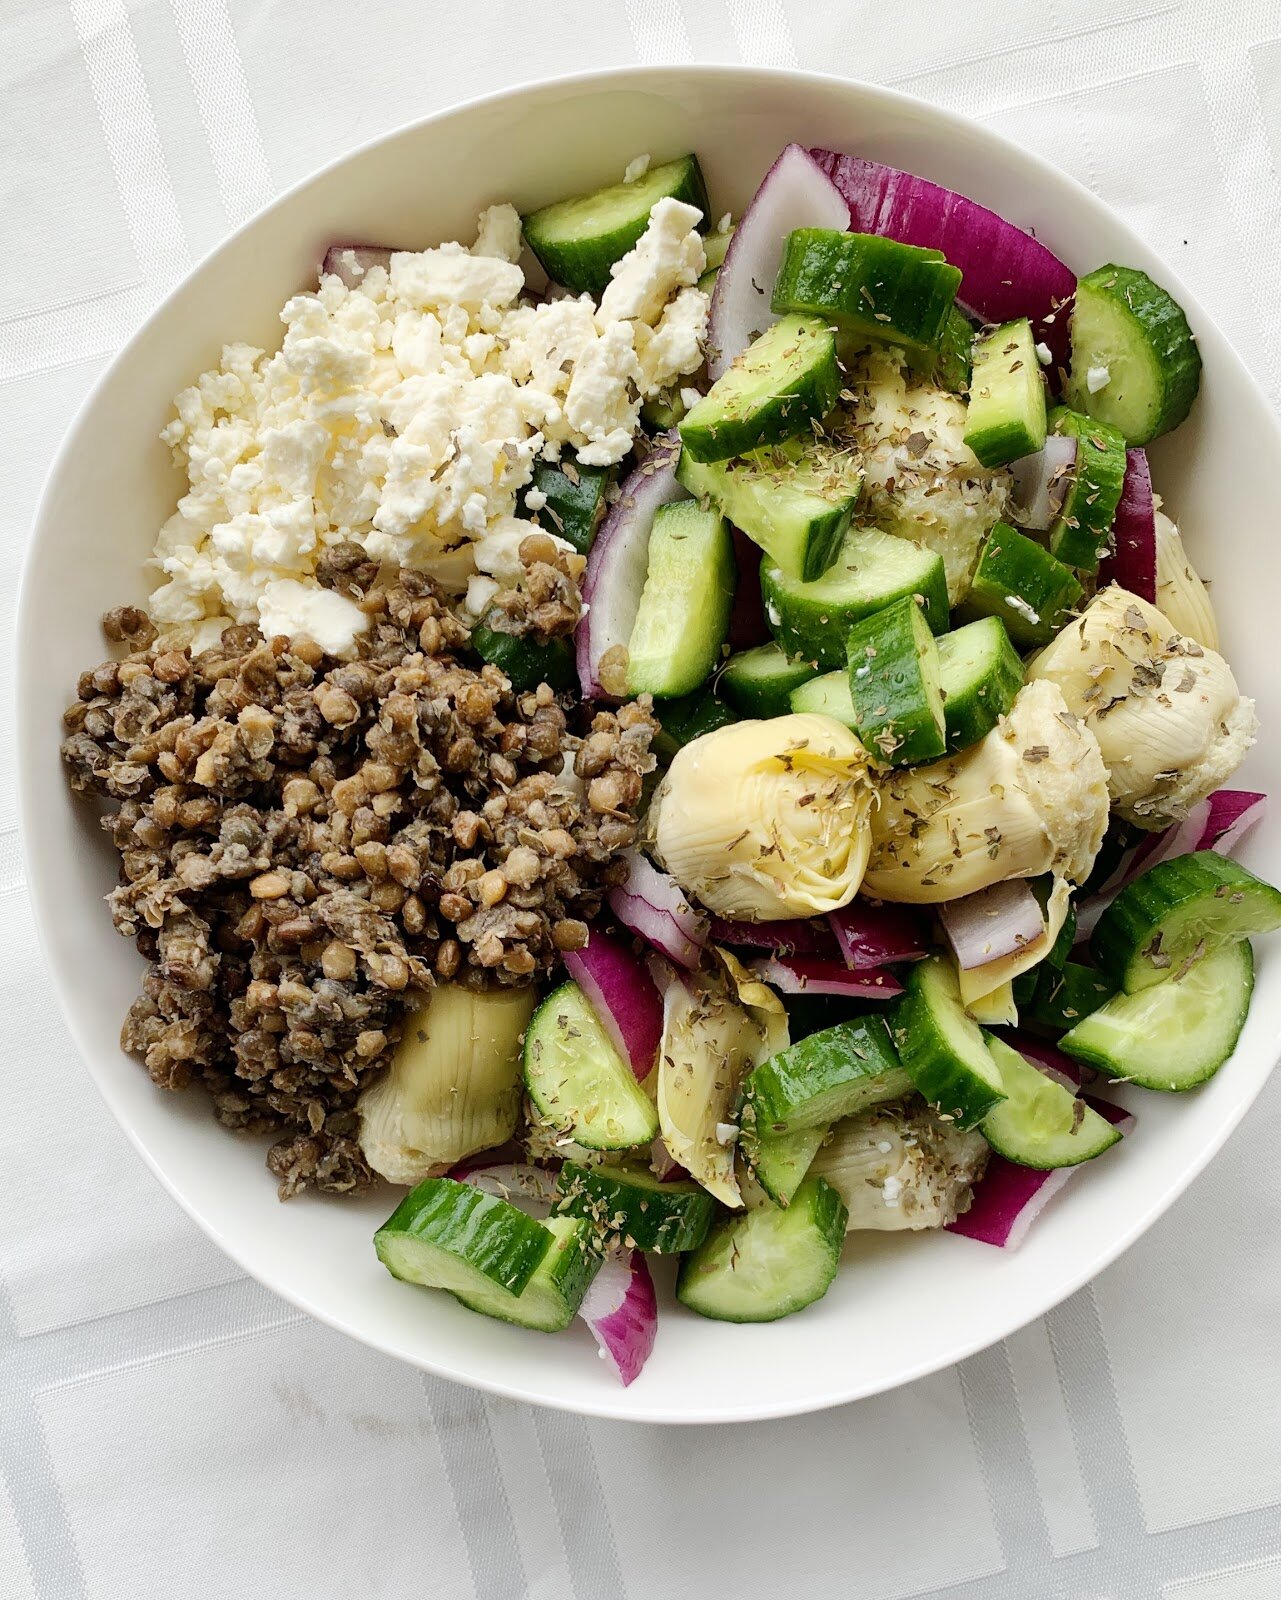 6 Easy Vegetarian Meals to Make Right Now